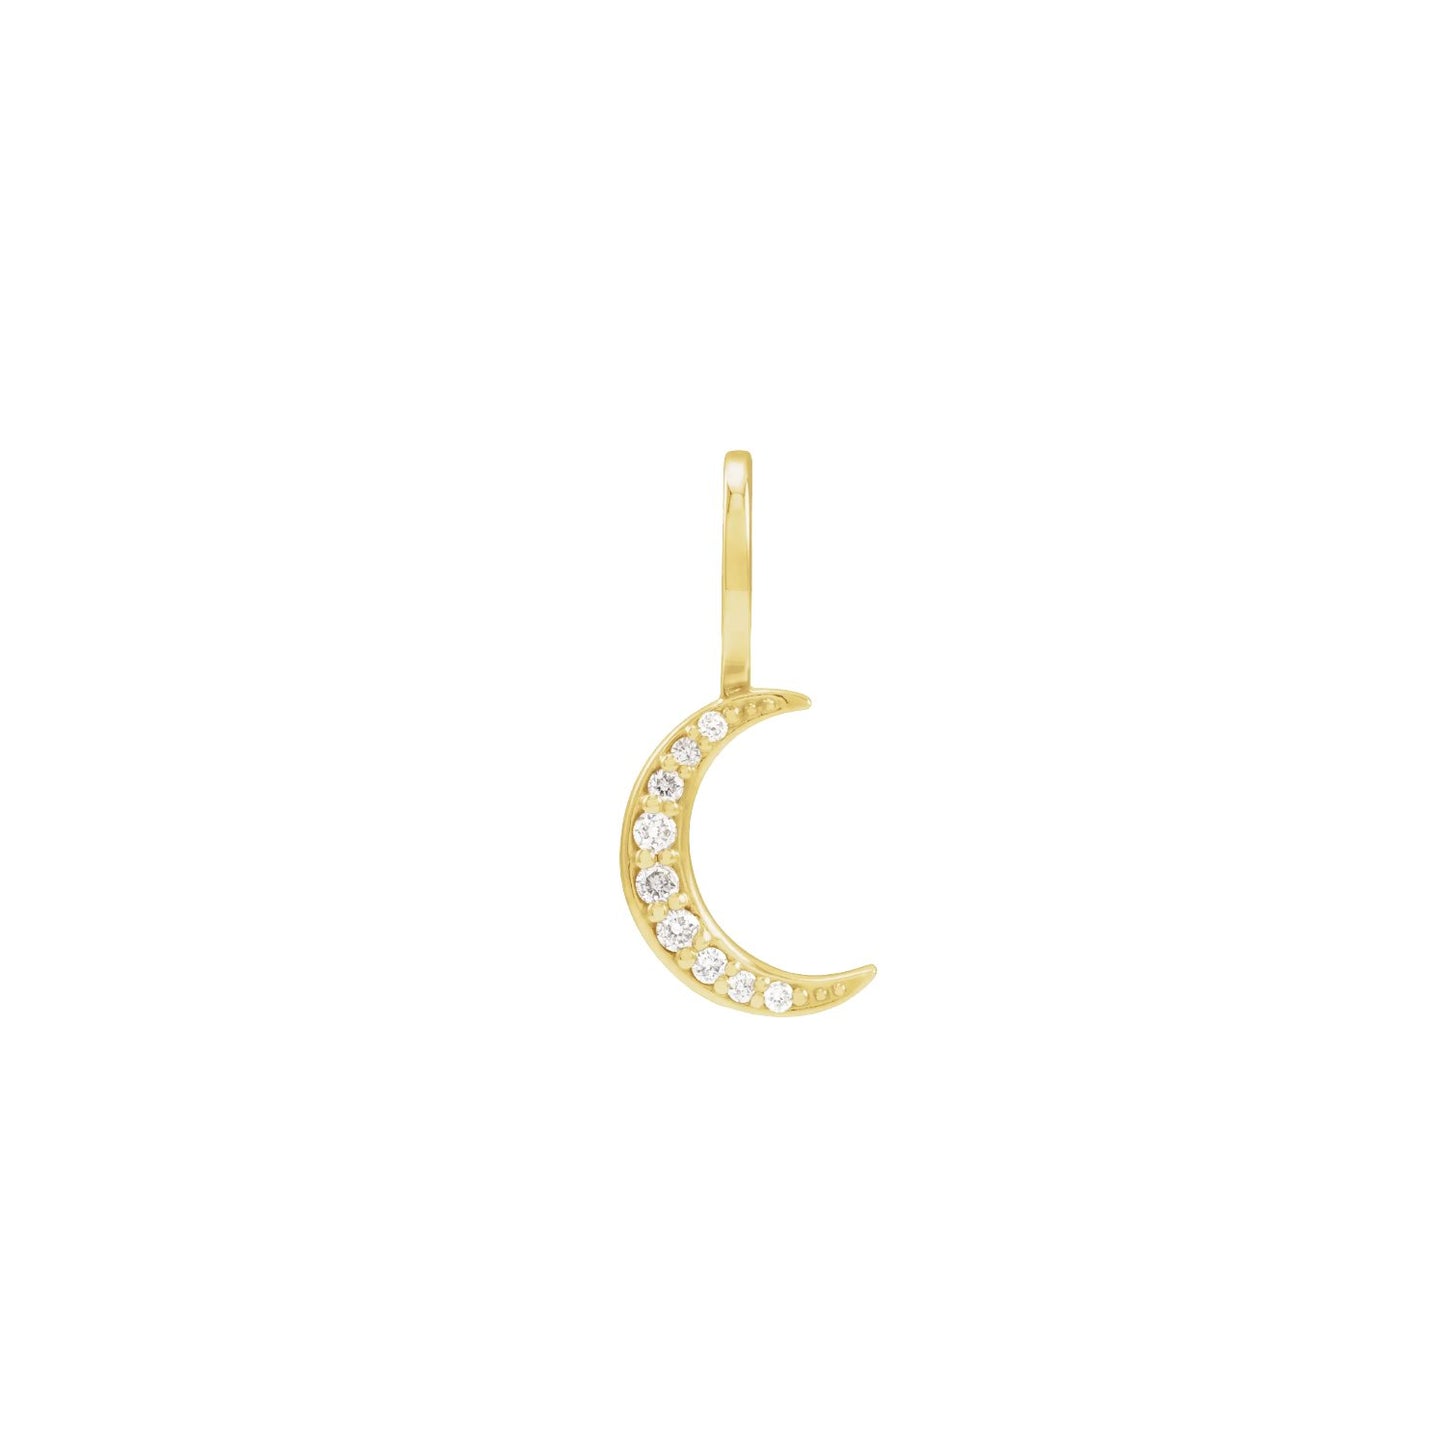 Add a Charm - 14K Solid Gold Crescent Moon with Diamonds charm Robyn Canady 